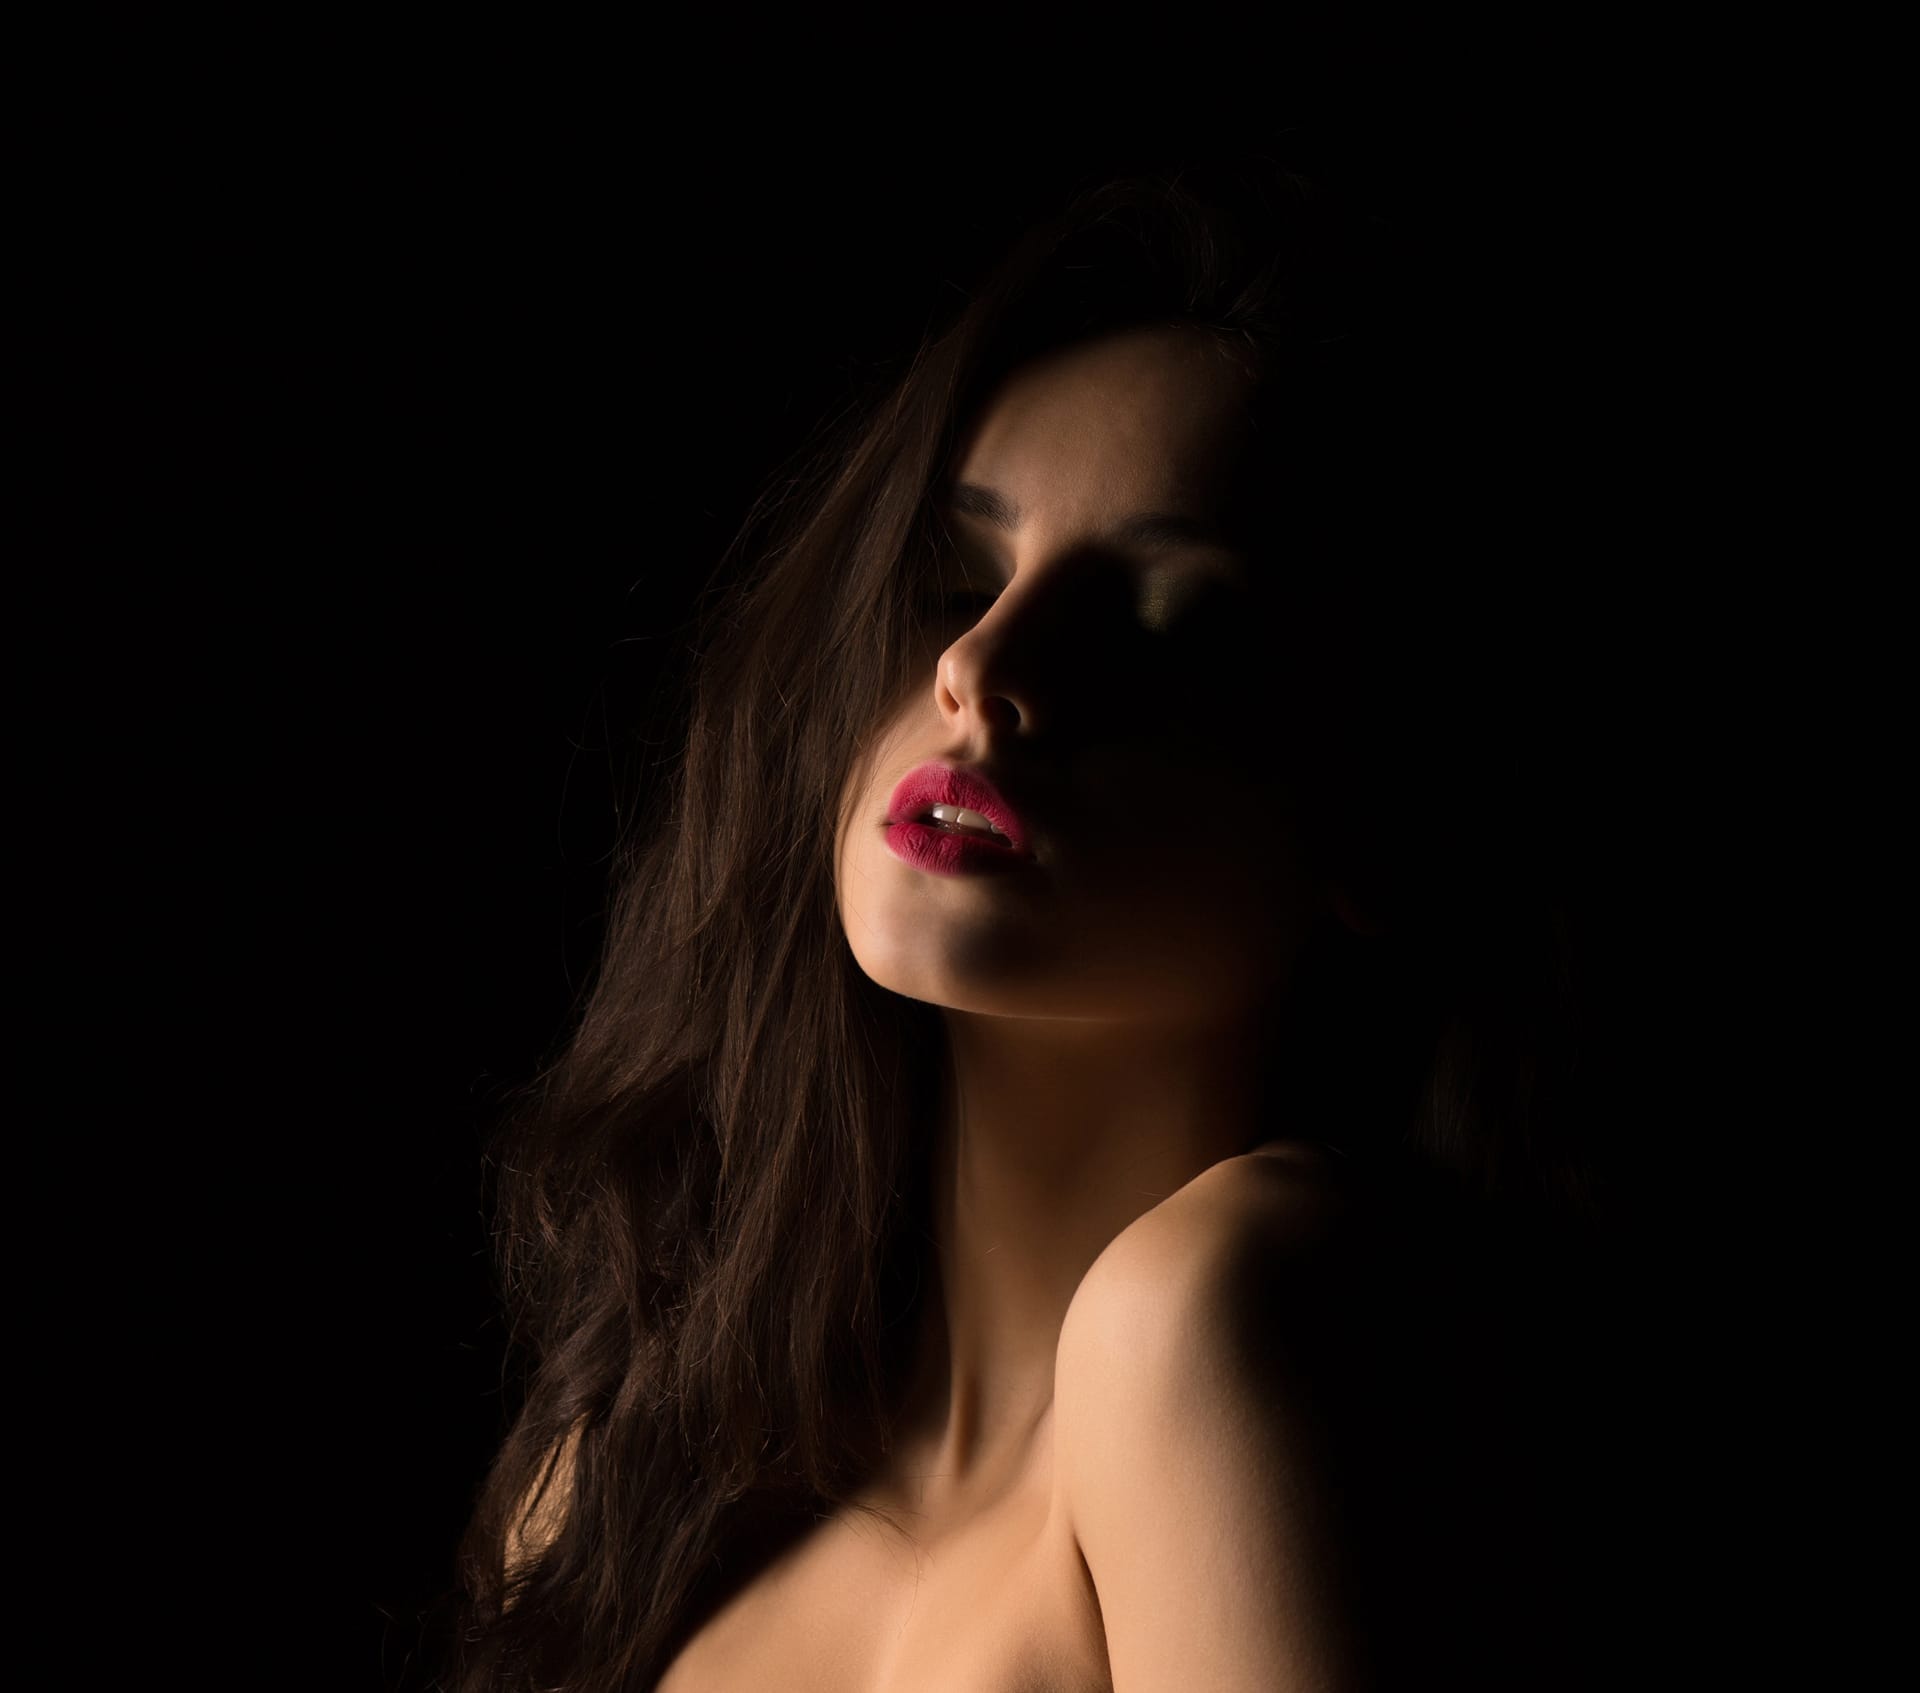 Sensual brunette young woman with naked shoulders posing dark studio